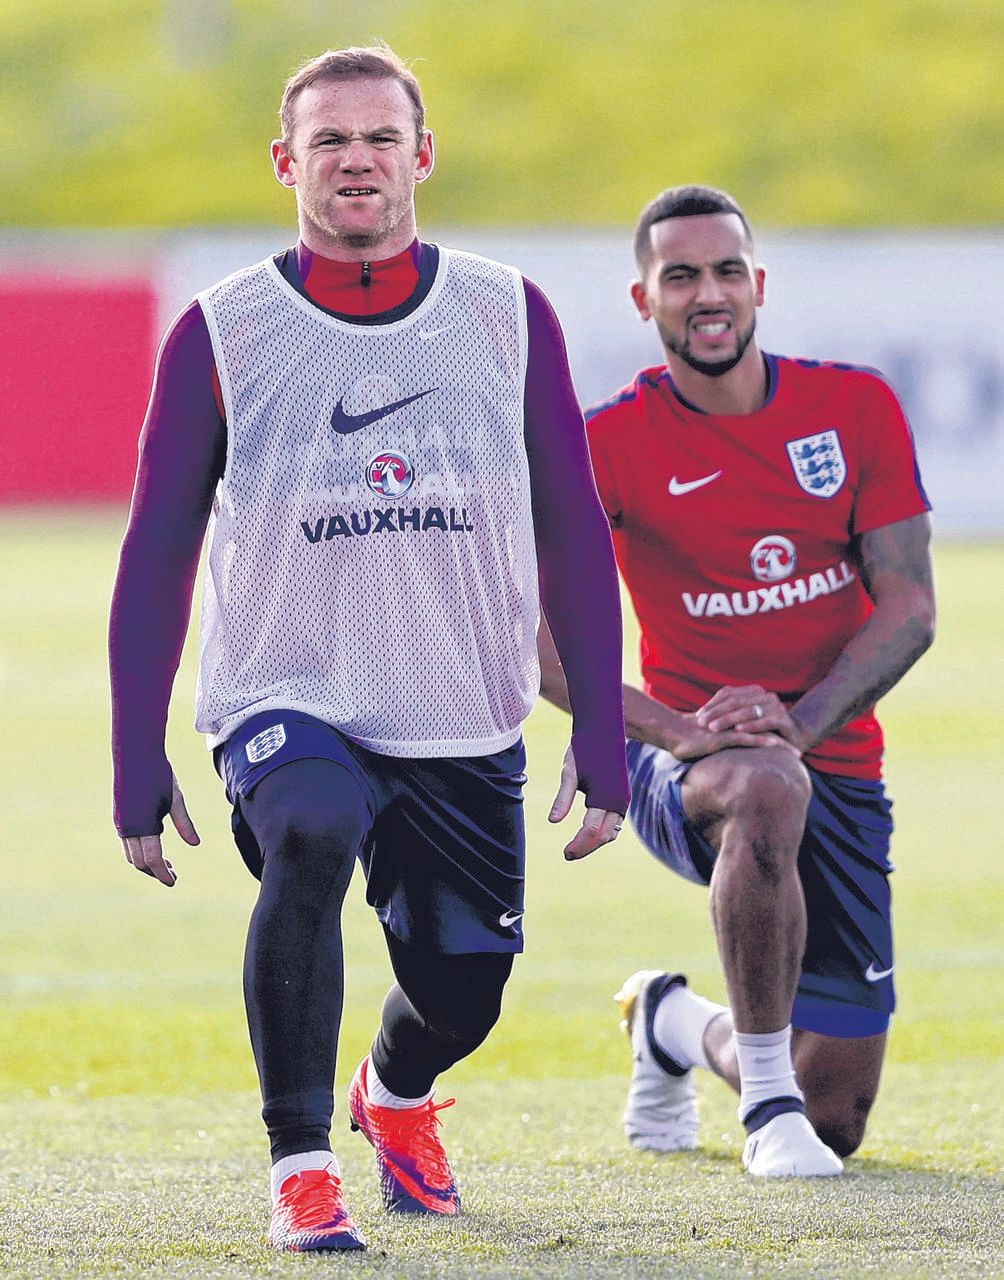 While Wayne Rooney (left) struggles to adapt to a different role on the pitch for England and Manchester United, Theo Walcott is trying to fend off the onset of numerous injuries that have stalled his career.